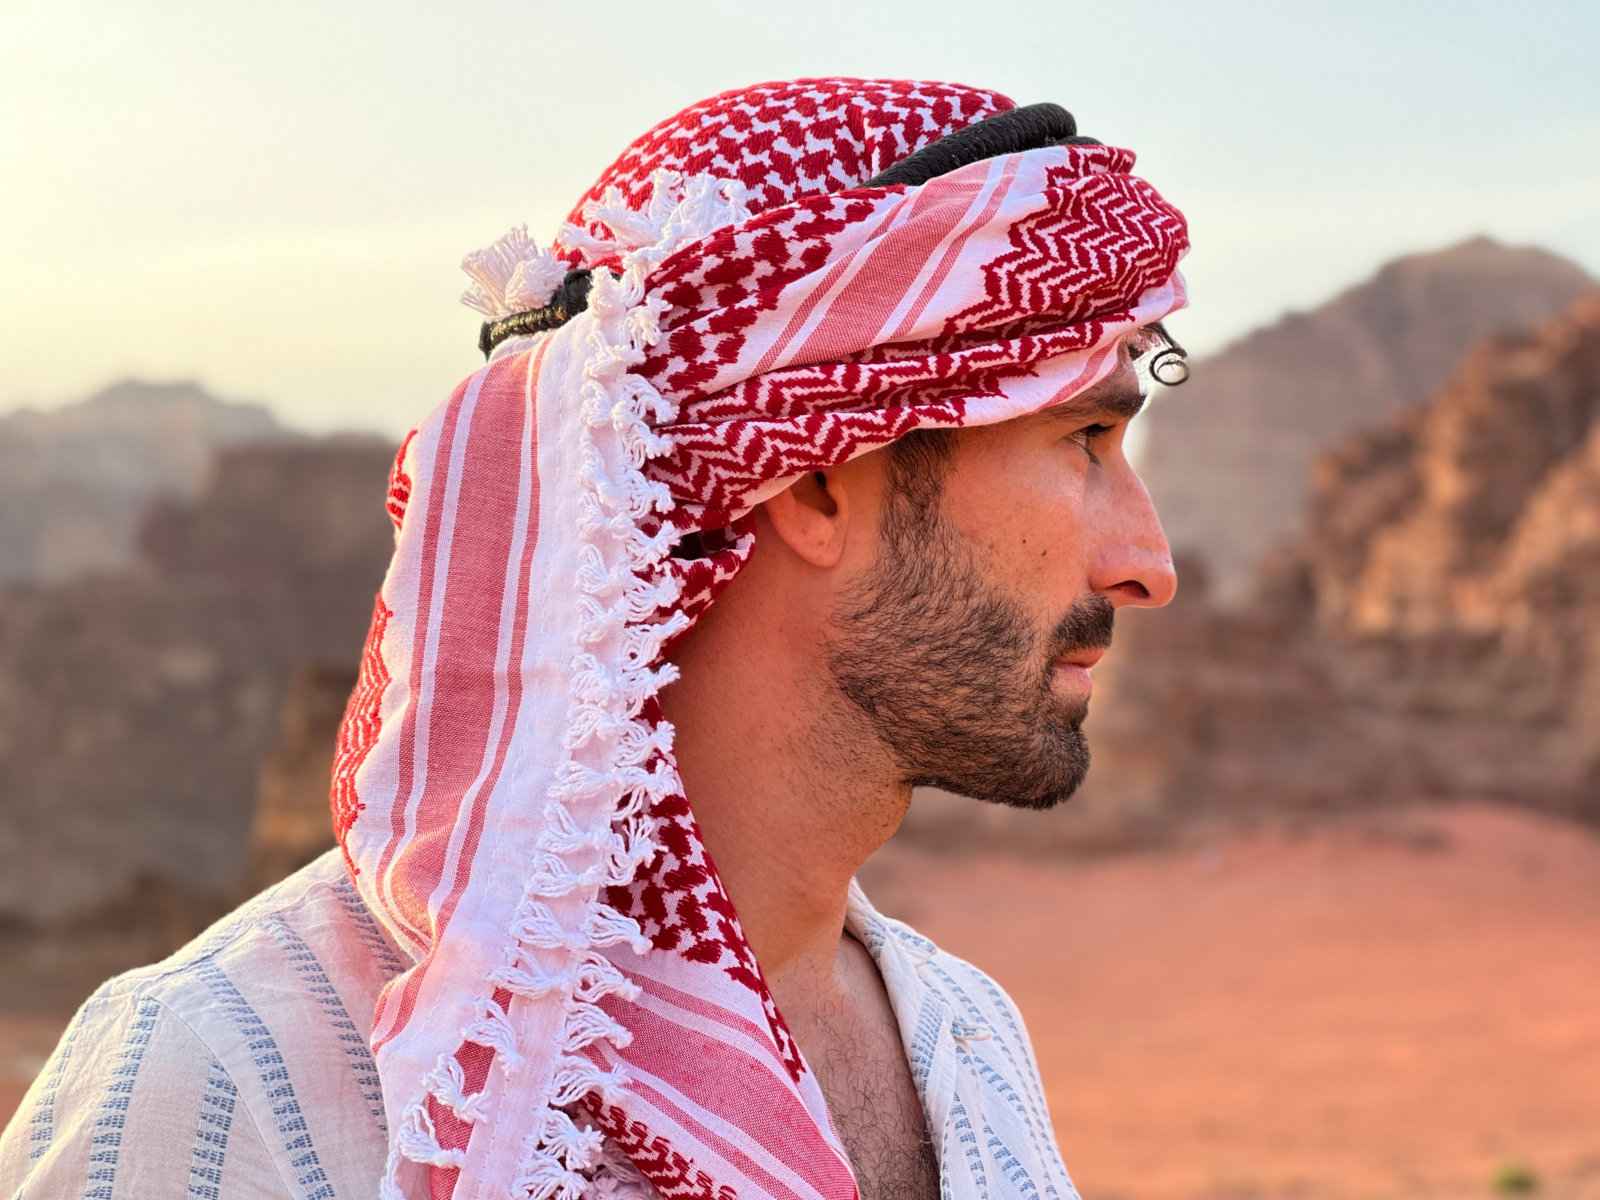 Stefan from Nomadic Boys gay travel blog posing with a headscarf in the desert of Jordan. 